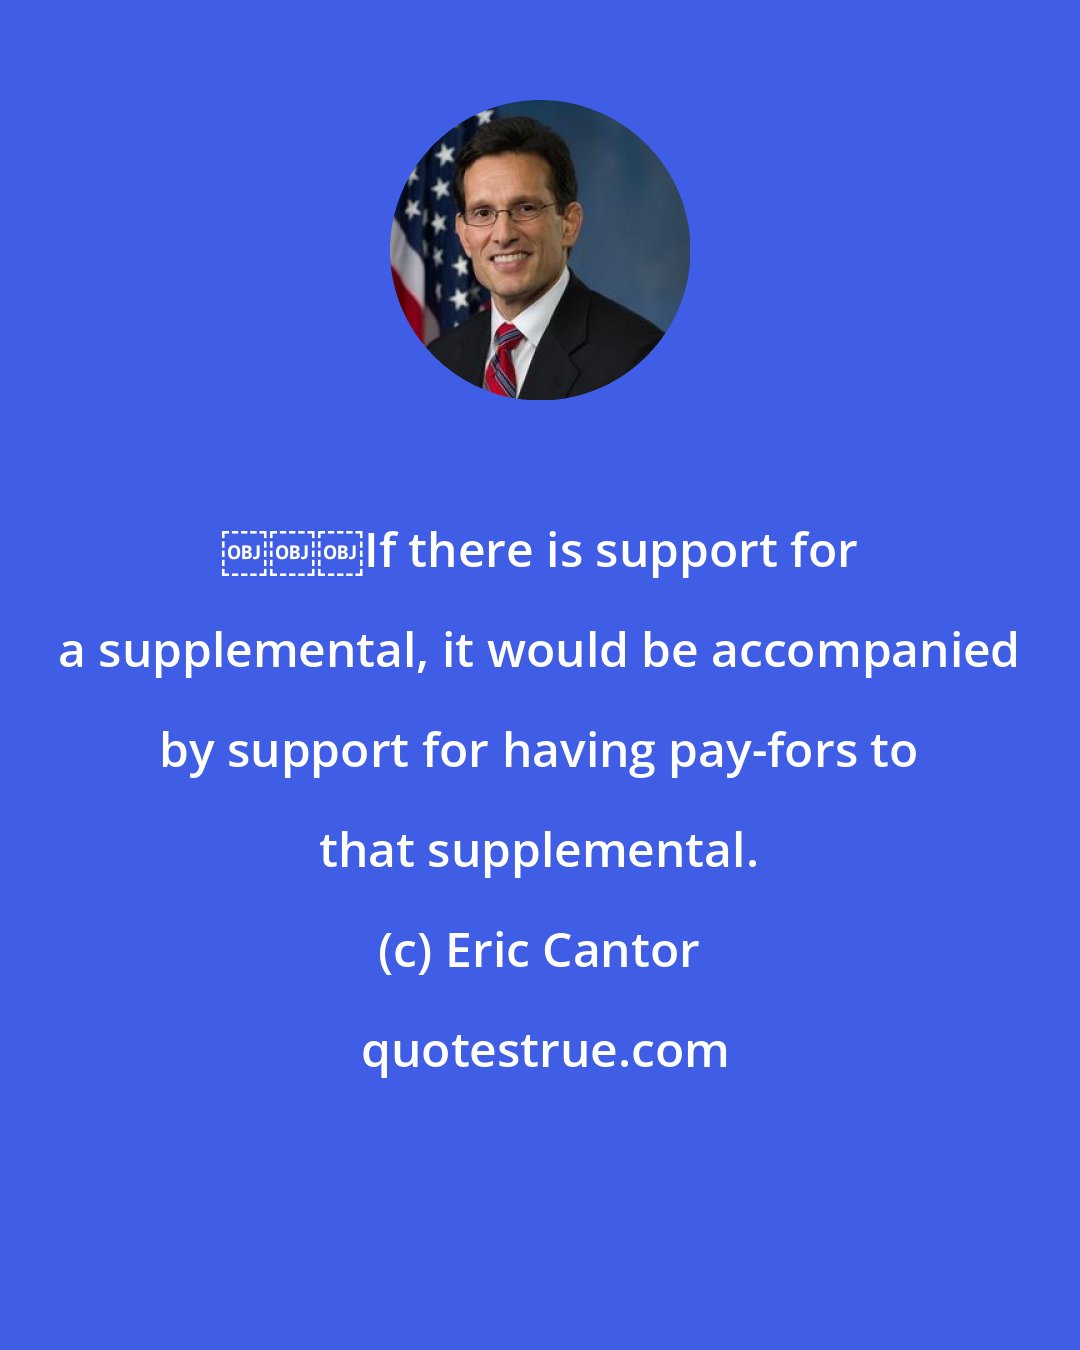 Eric Cantor: ￼￼￼If there is support for a supplemental, it would be accompanied by support for having pay-fors to that supplemental.